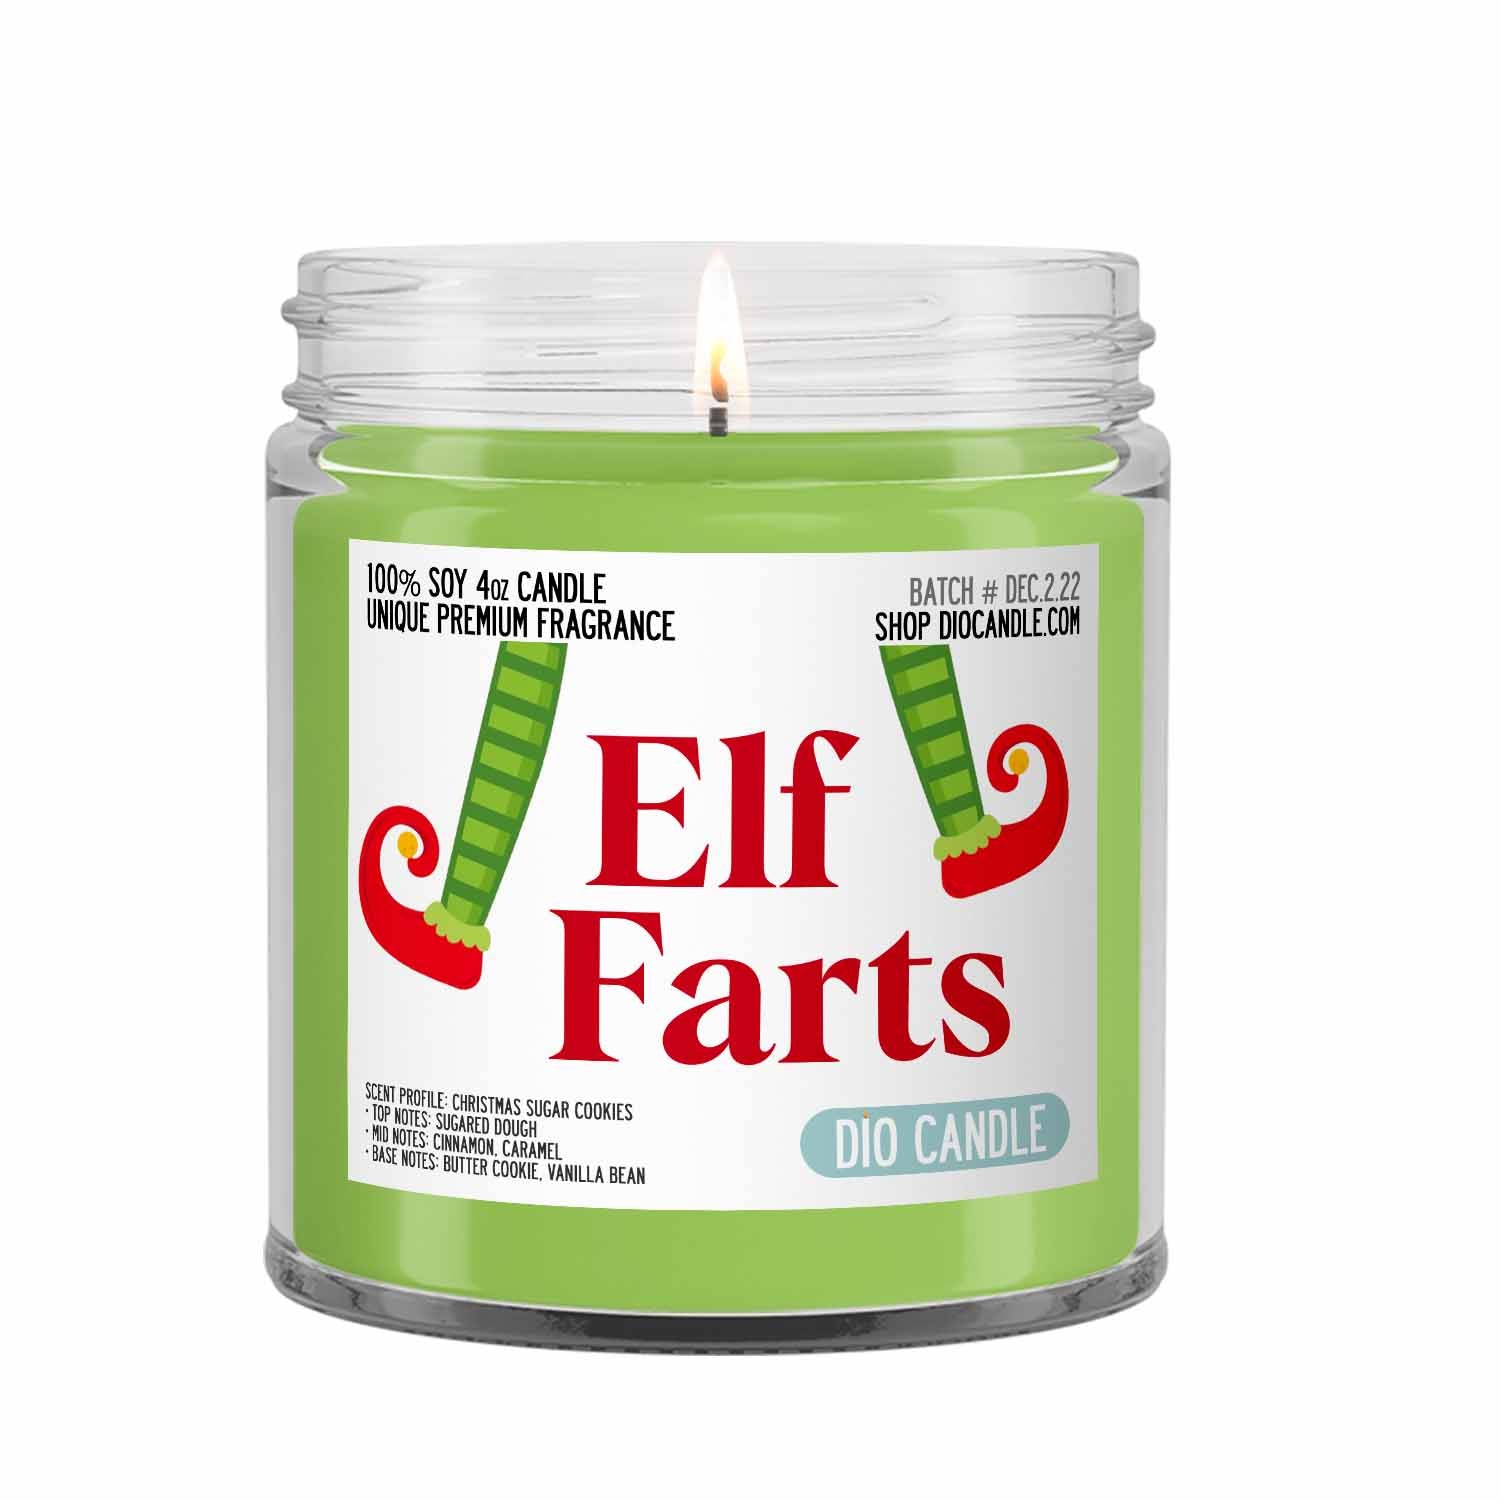 SANTA FARTS FRAGRANCE OIL - 4 OZ - FOR CANDLE & SOAP MAKING BY